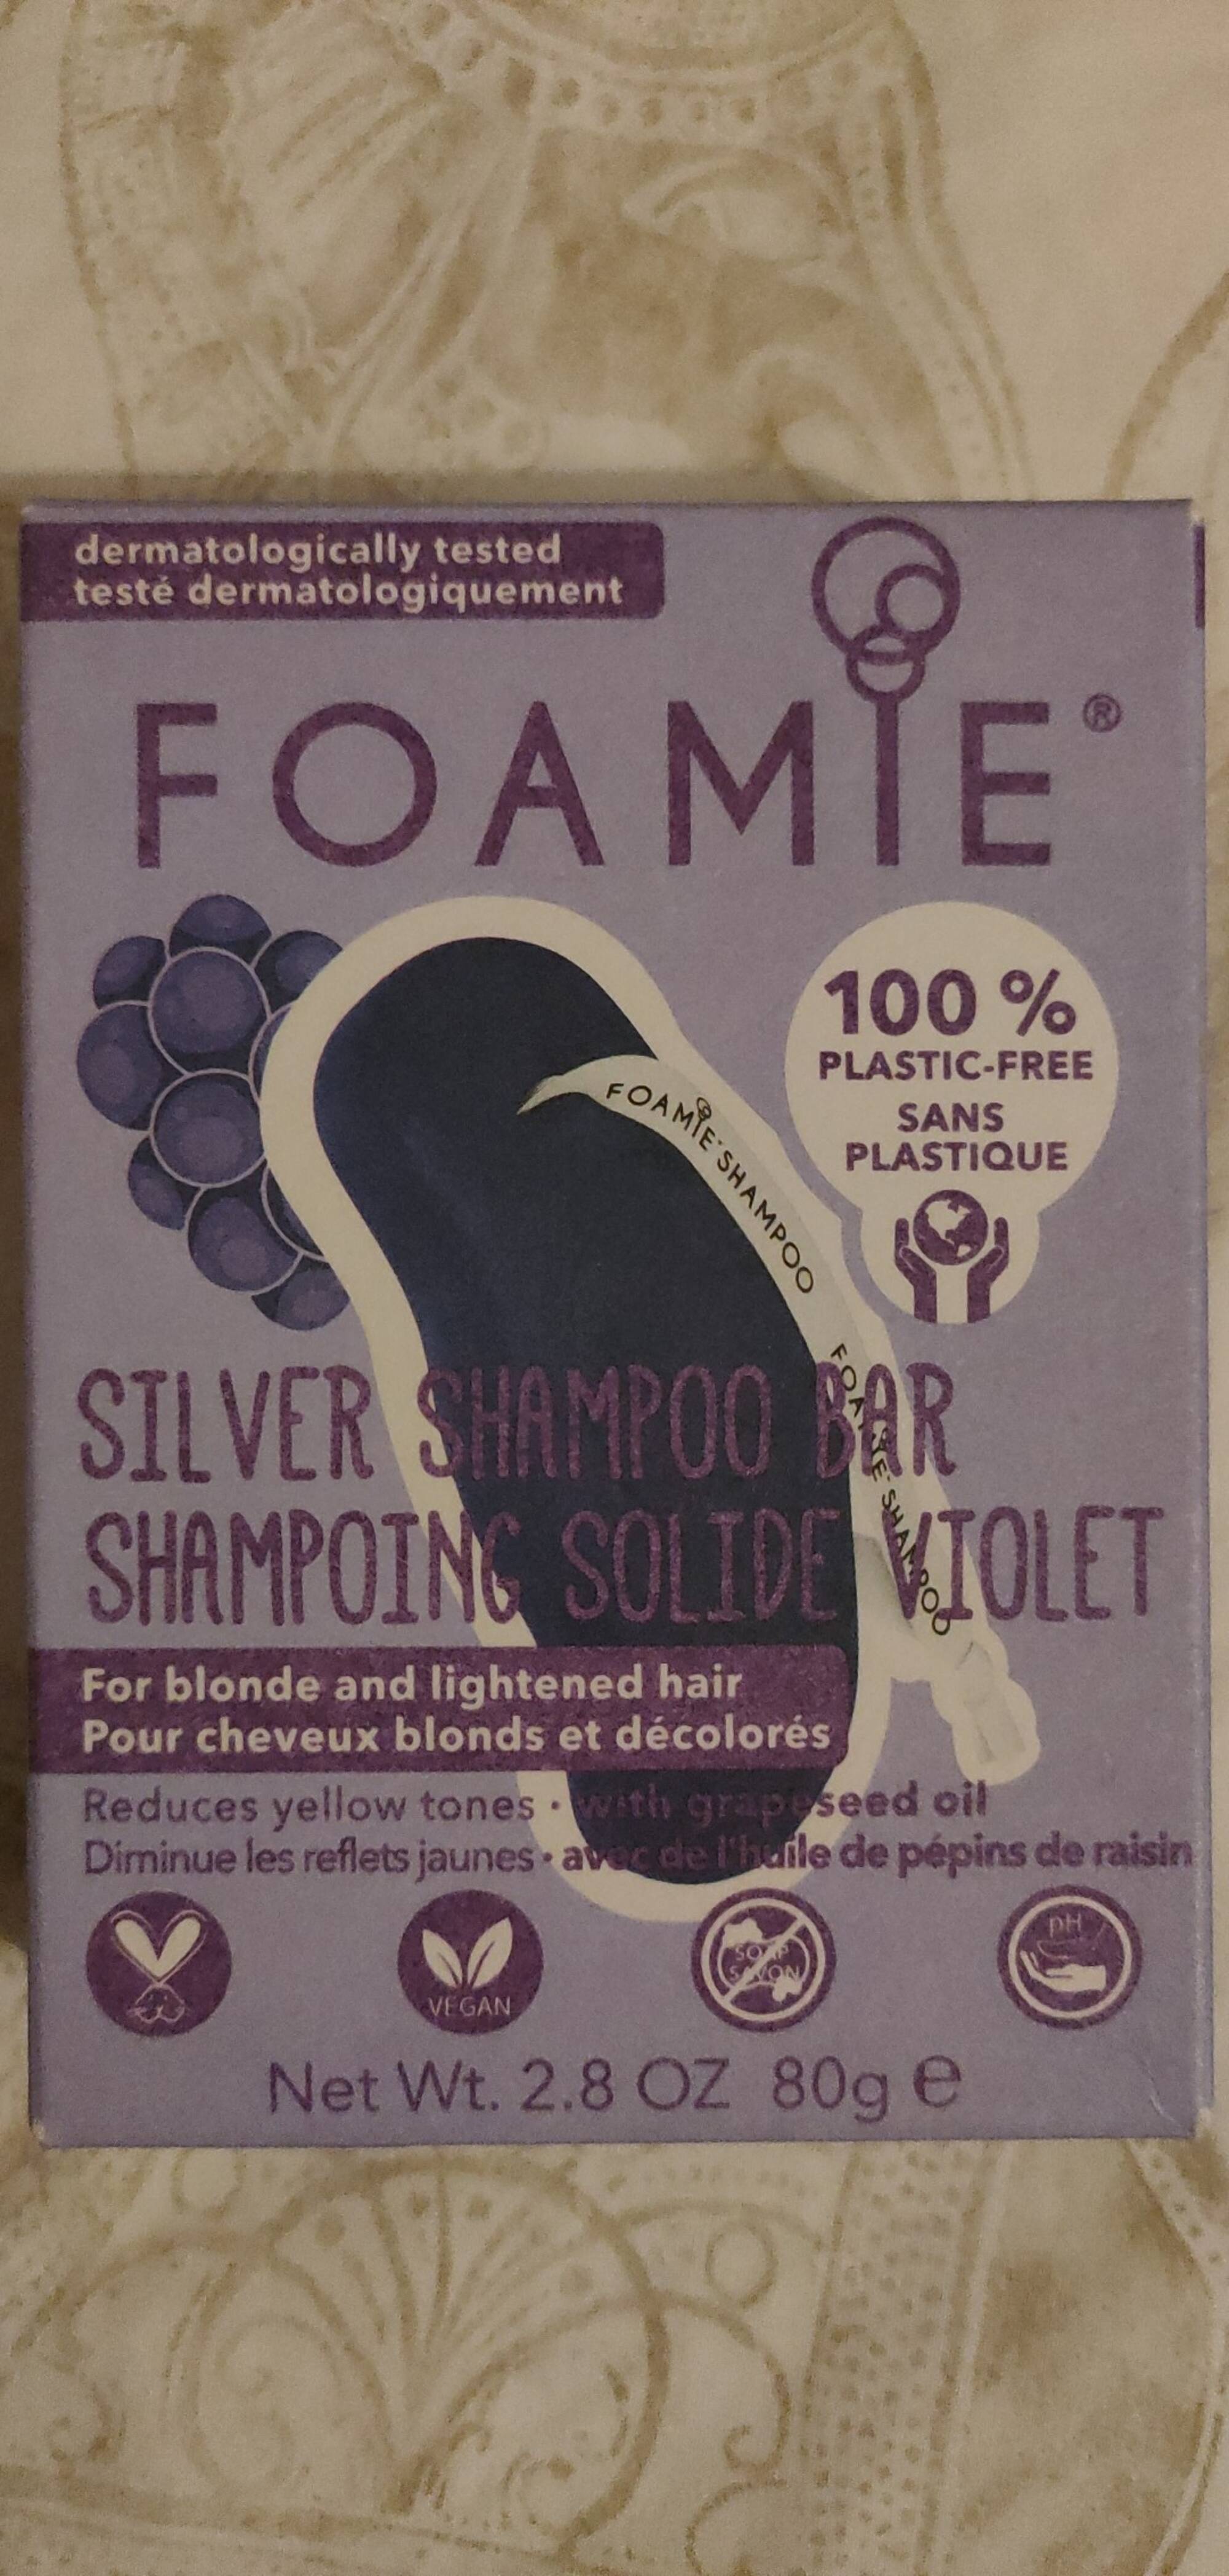 FOAMIE - Shampoing solide violet